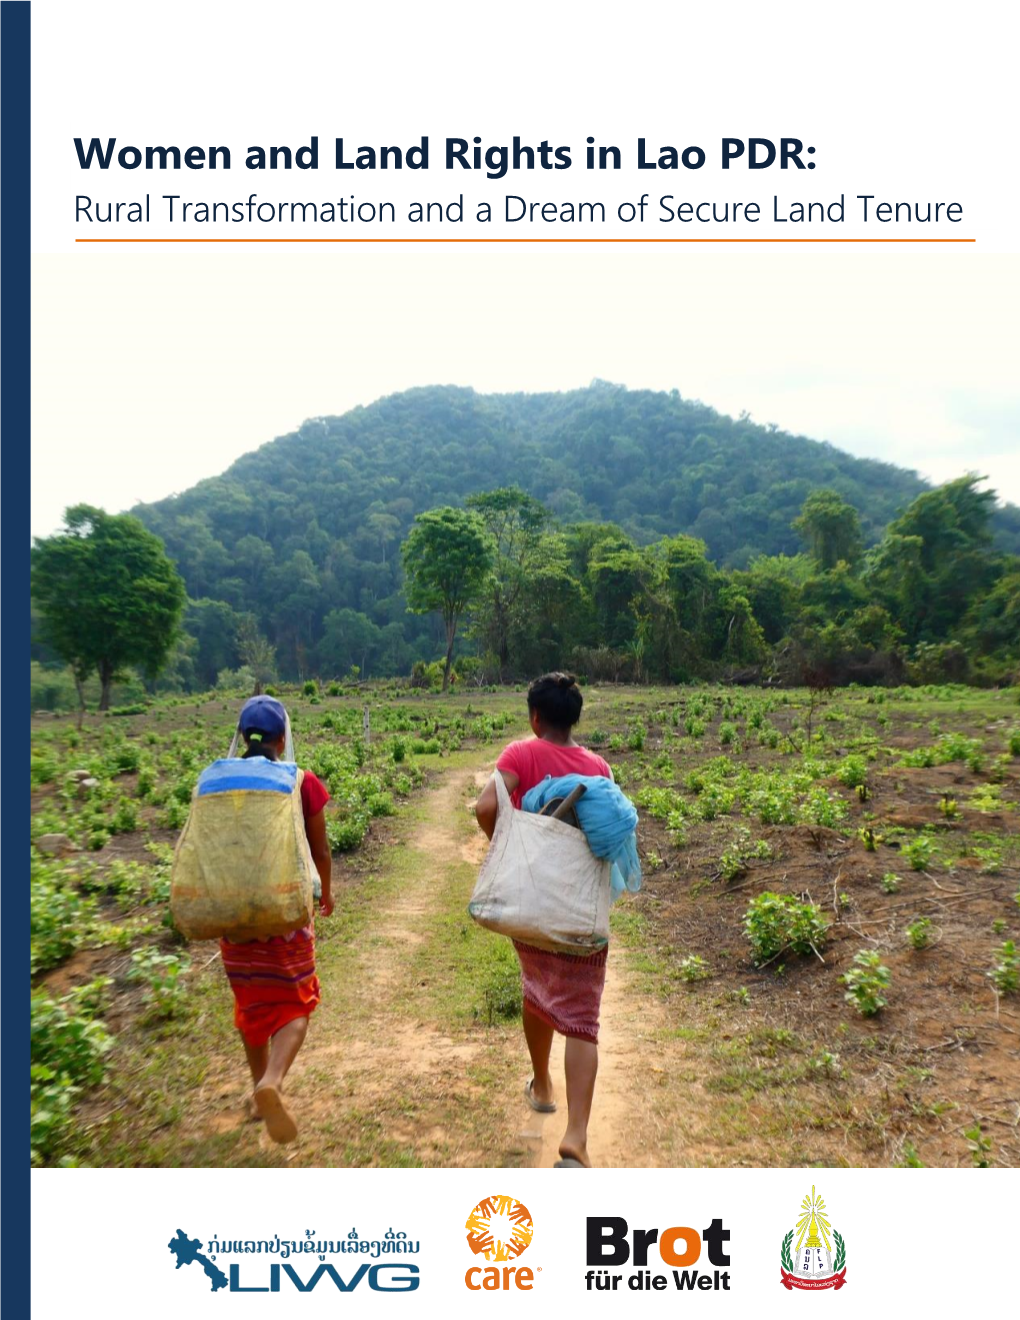 Women and Land Rights in Lao PDR